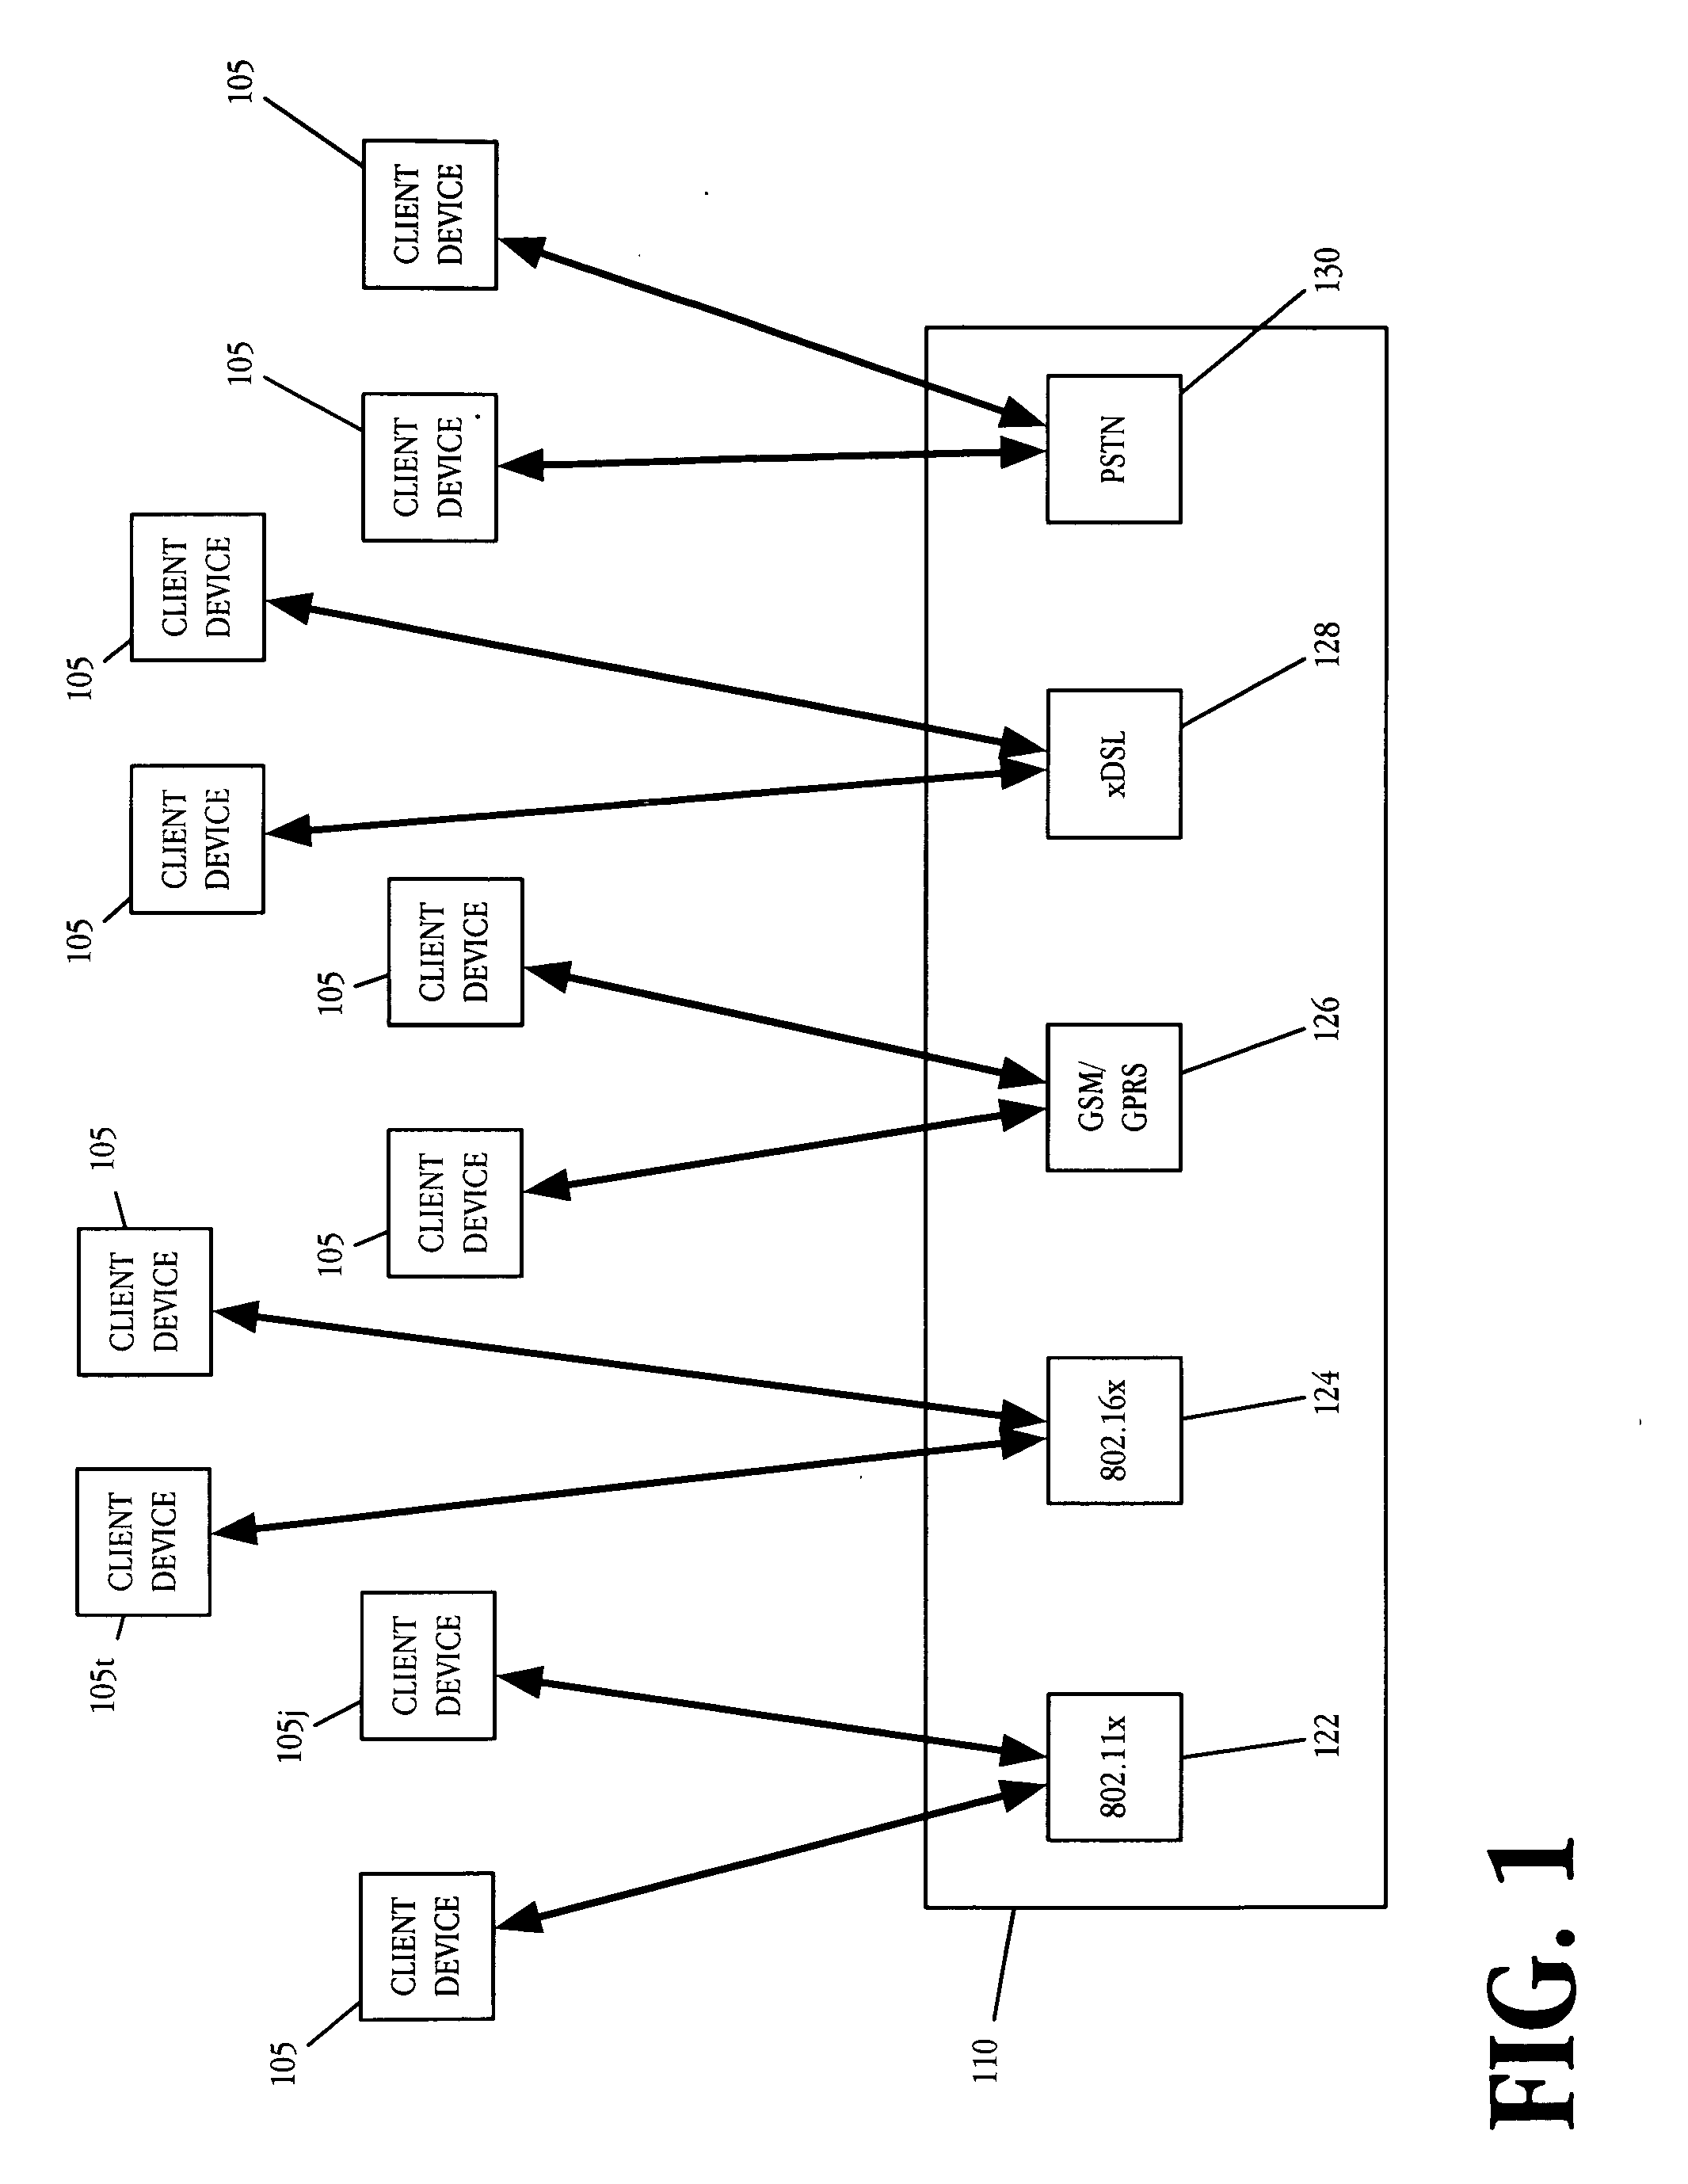 Systems and methods for virtualizing functions and decentralizing service delivery in a flat network of interconnected personal devices